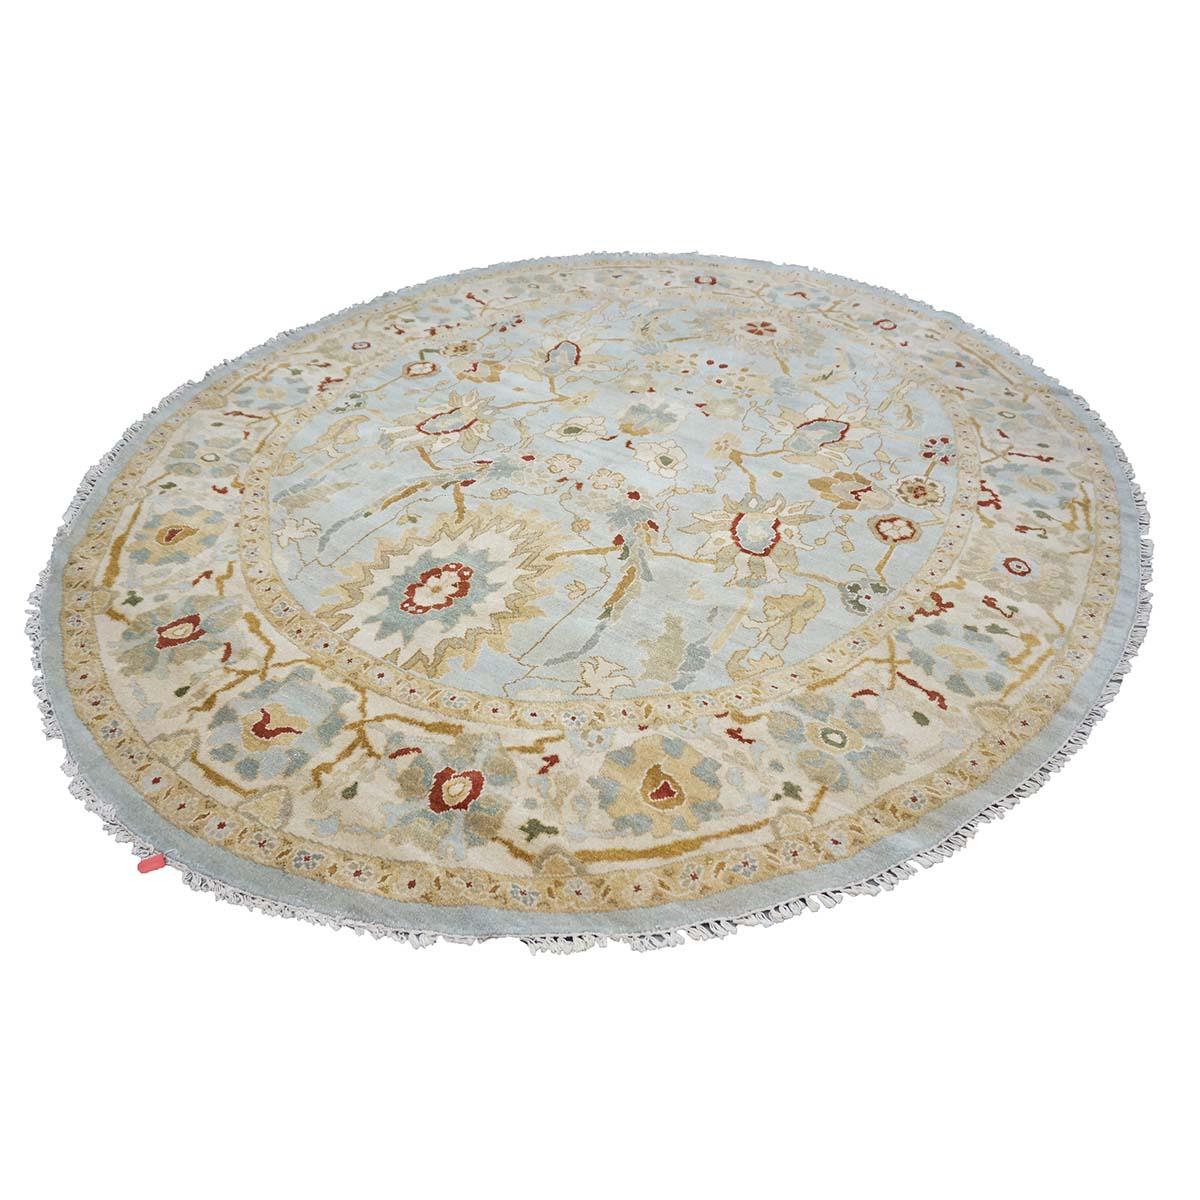 21st Century Oval Sultanabad 8x10 Light Blue & Ivory Handmade Area Rug In Excellent Condition For Sale In Houston, TX